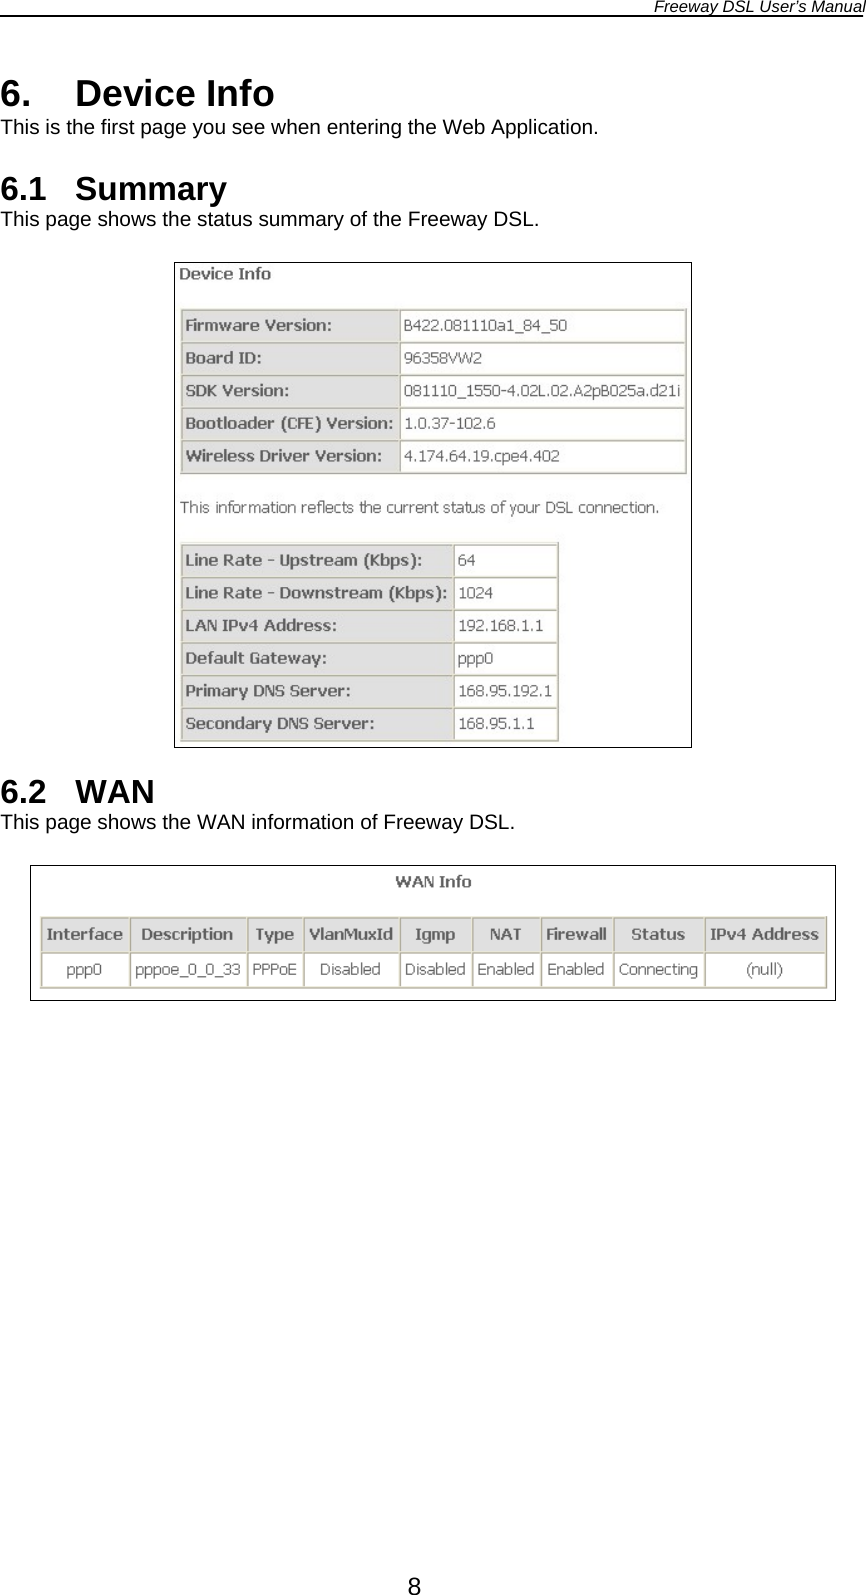 Freeway DSL User’s Manual  8 6. Device Info This is the first page you see when entering the Web Application.  6.1 Summary This page shows the status summary of the Freeway DSL.    6.2 WAN This page shows the WAN information of Freeway DSL.    